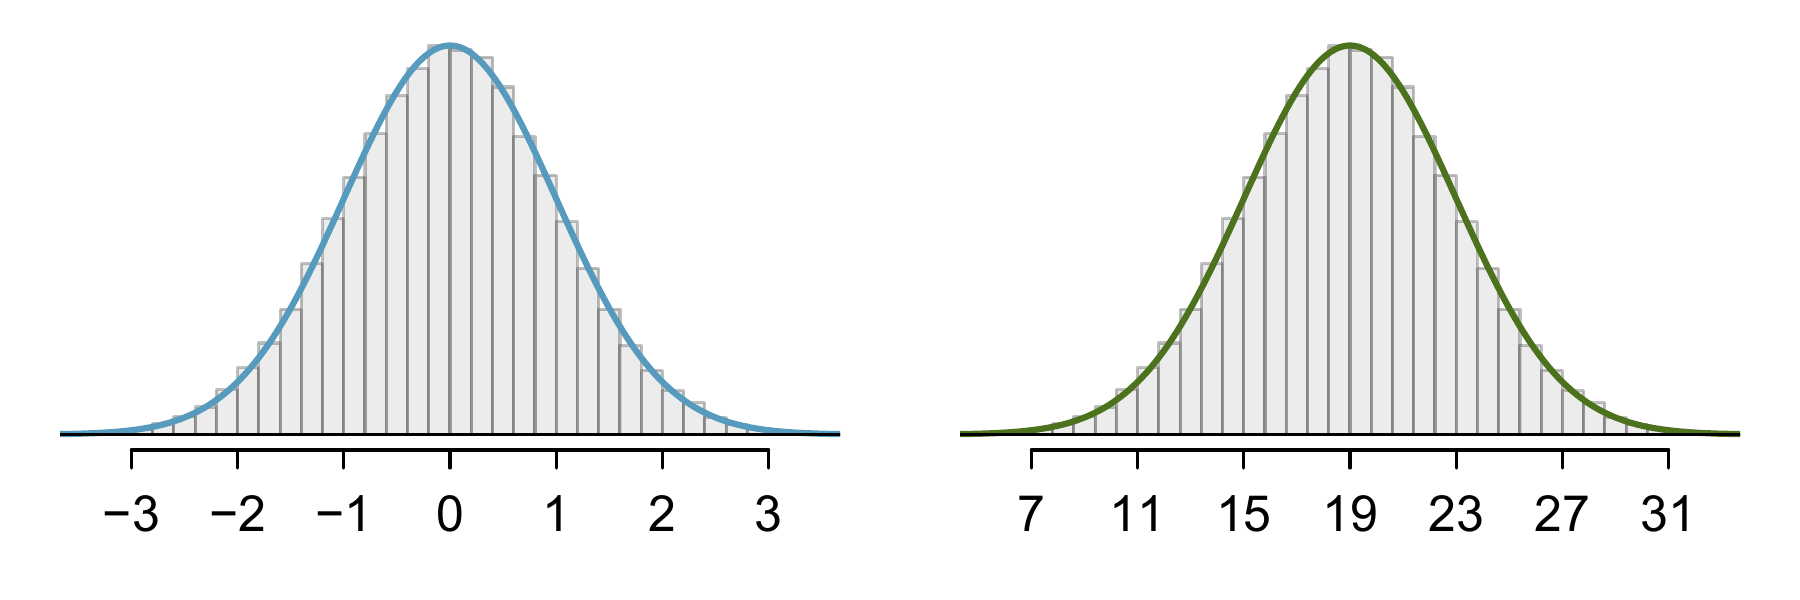 Both curves represent the normal distribution, however, they differ in their centre and spread. The normal distribution with mean 0 and standard deviation 1 is called the standard normal distribution.